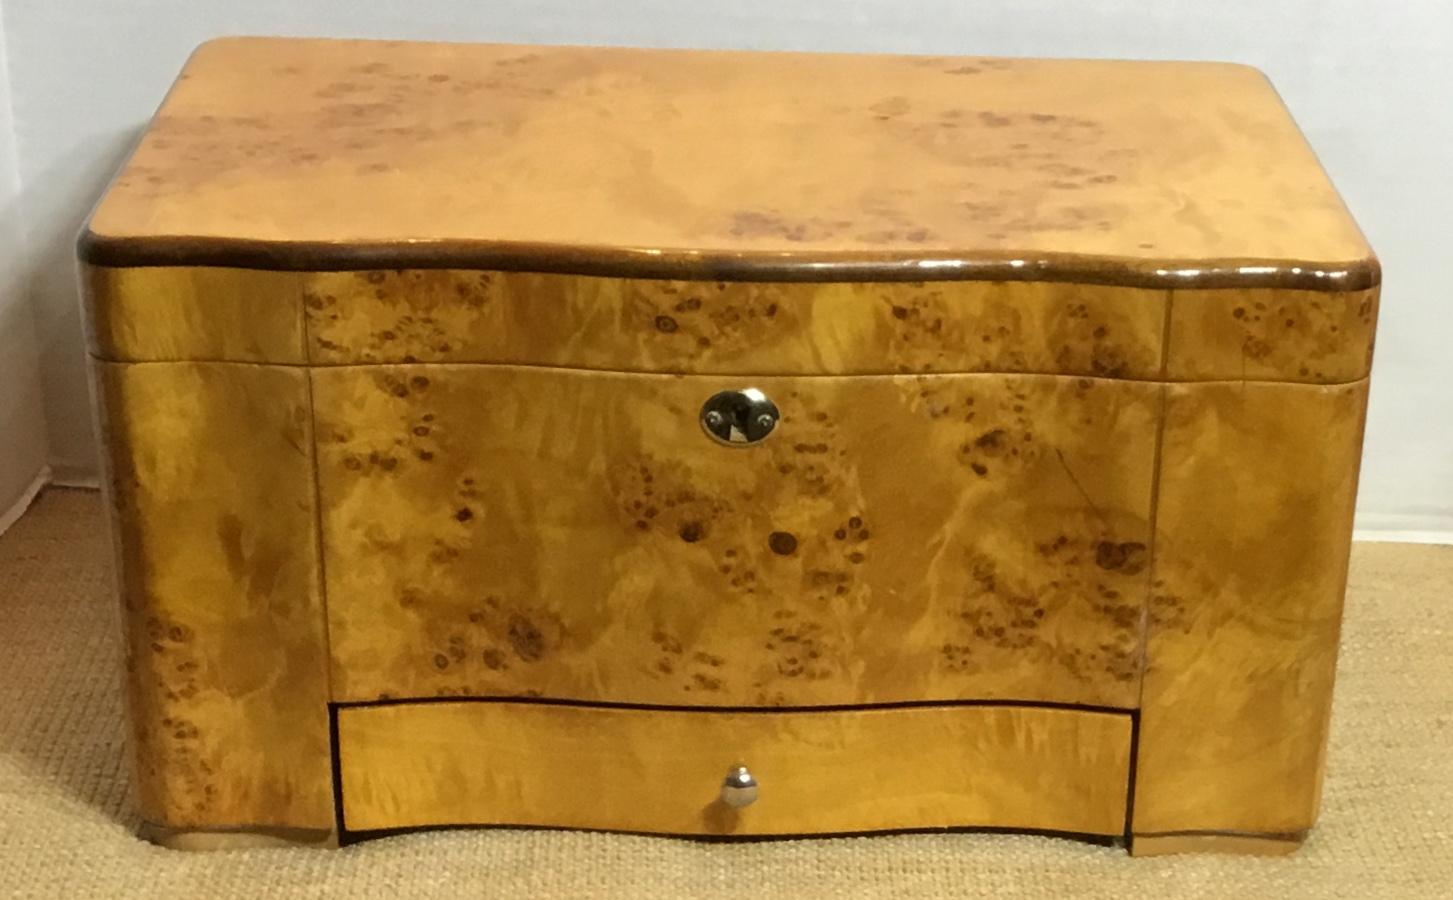 A Classic burr elm humidor made of cedar-lined interior with three compartments, heavy top cover
to keep in the aroma of the cigars in, and equipped with mounted instrument to measuring humidity.
Brass trimming, key is not included.